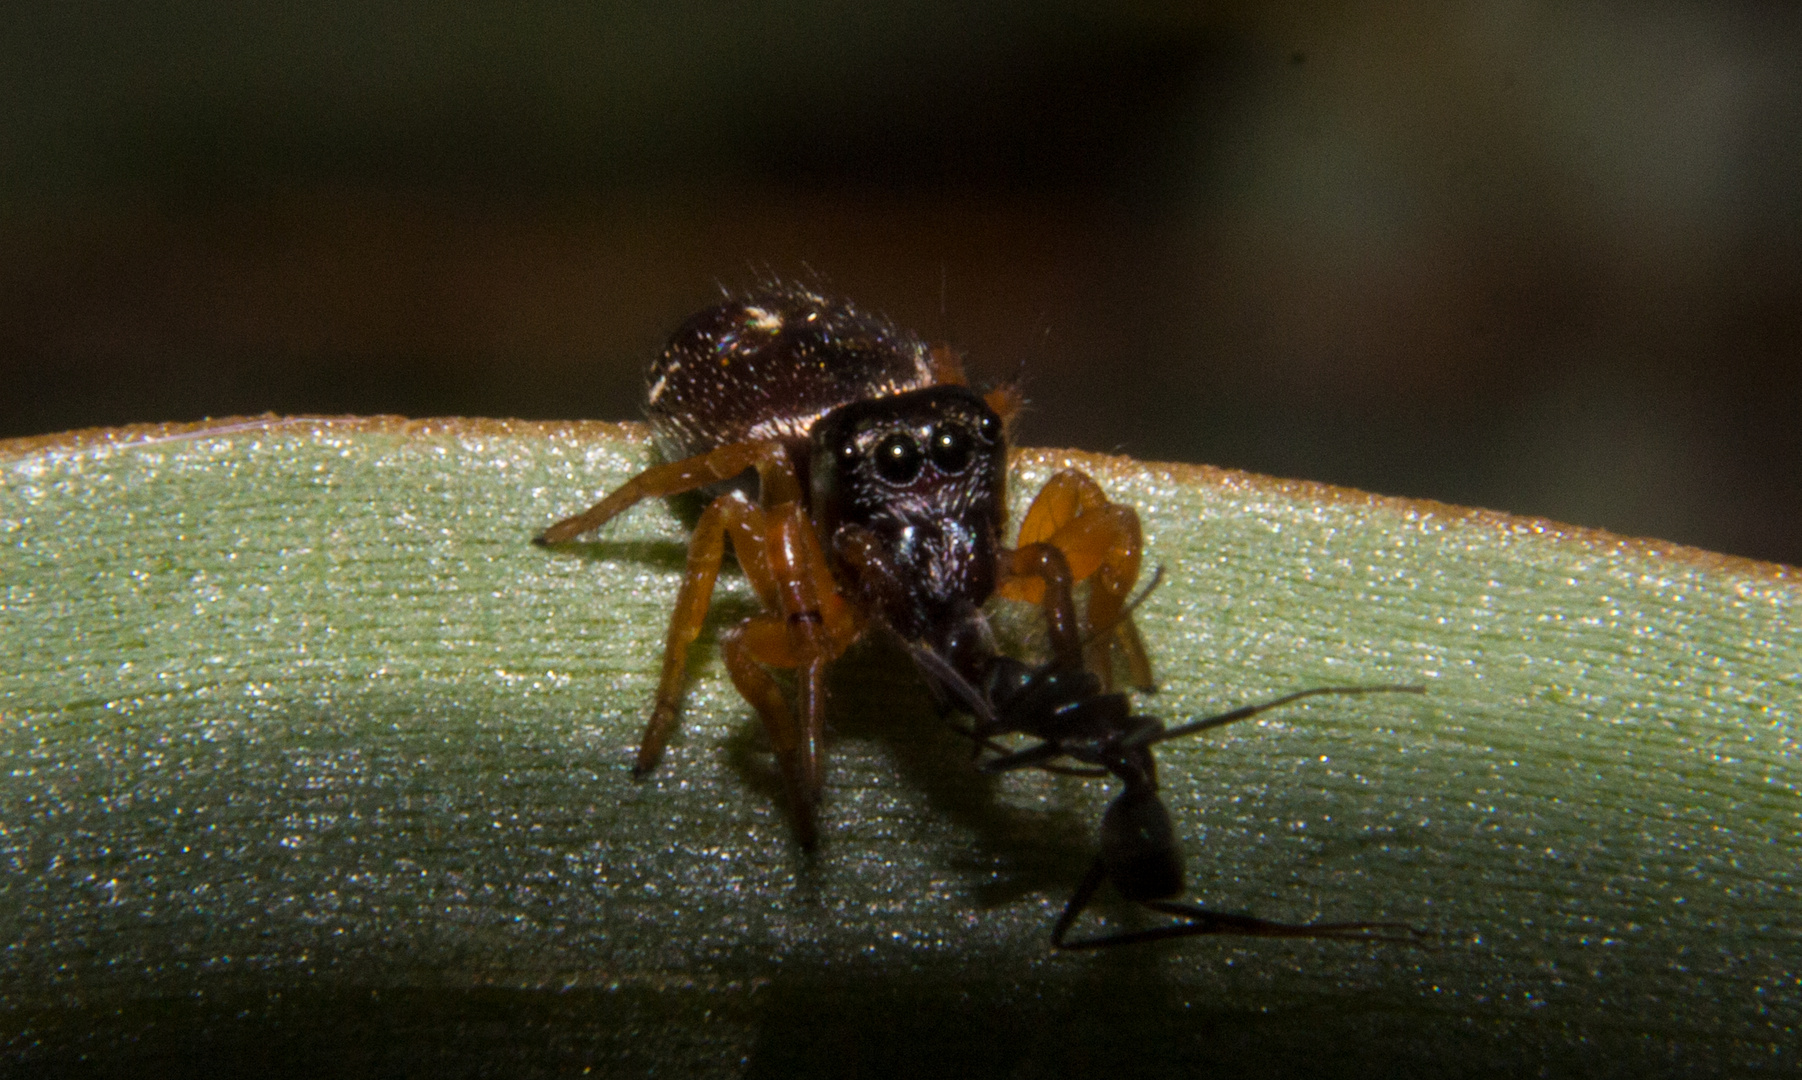 Spider eats ant